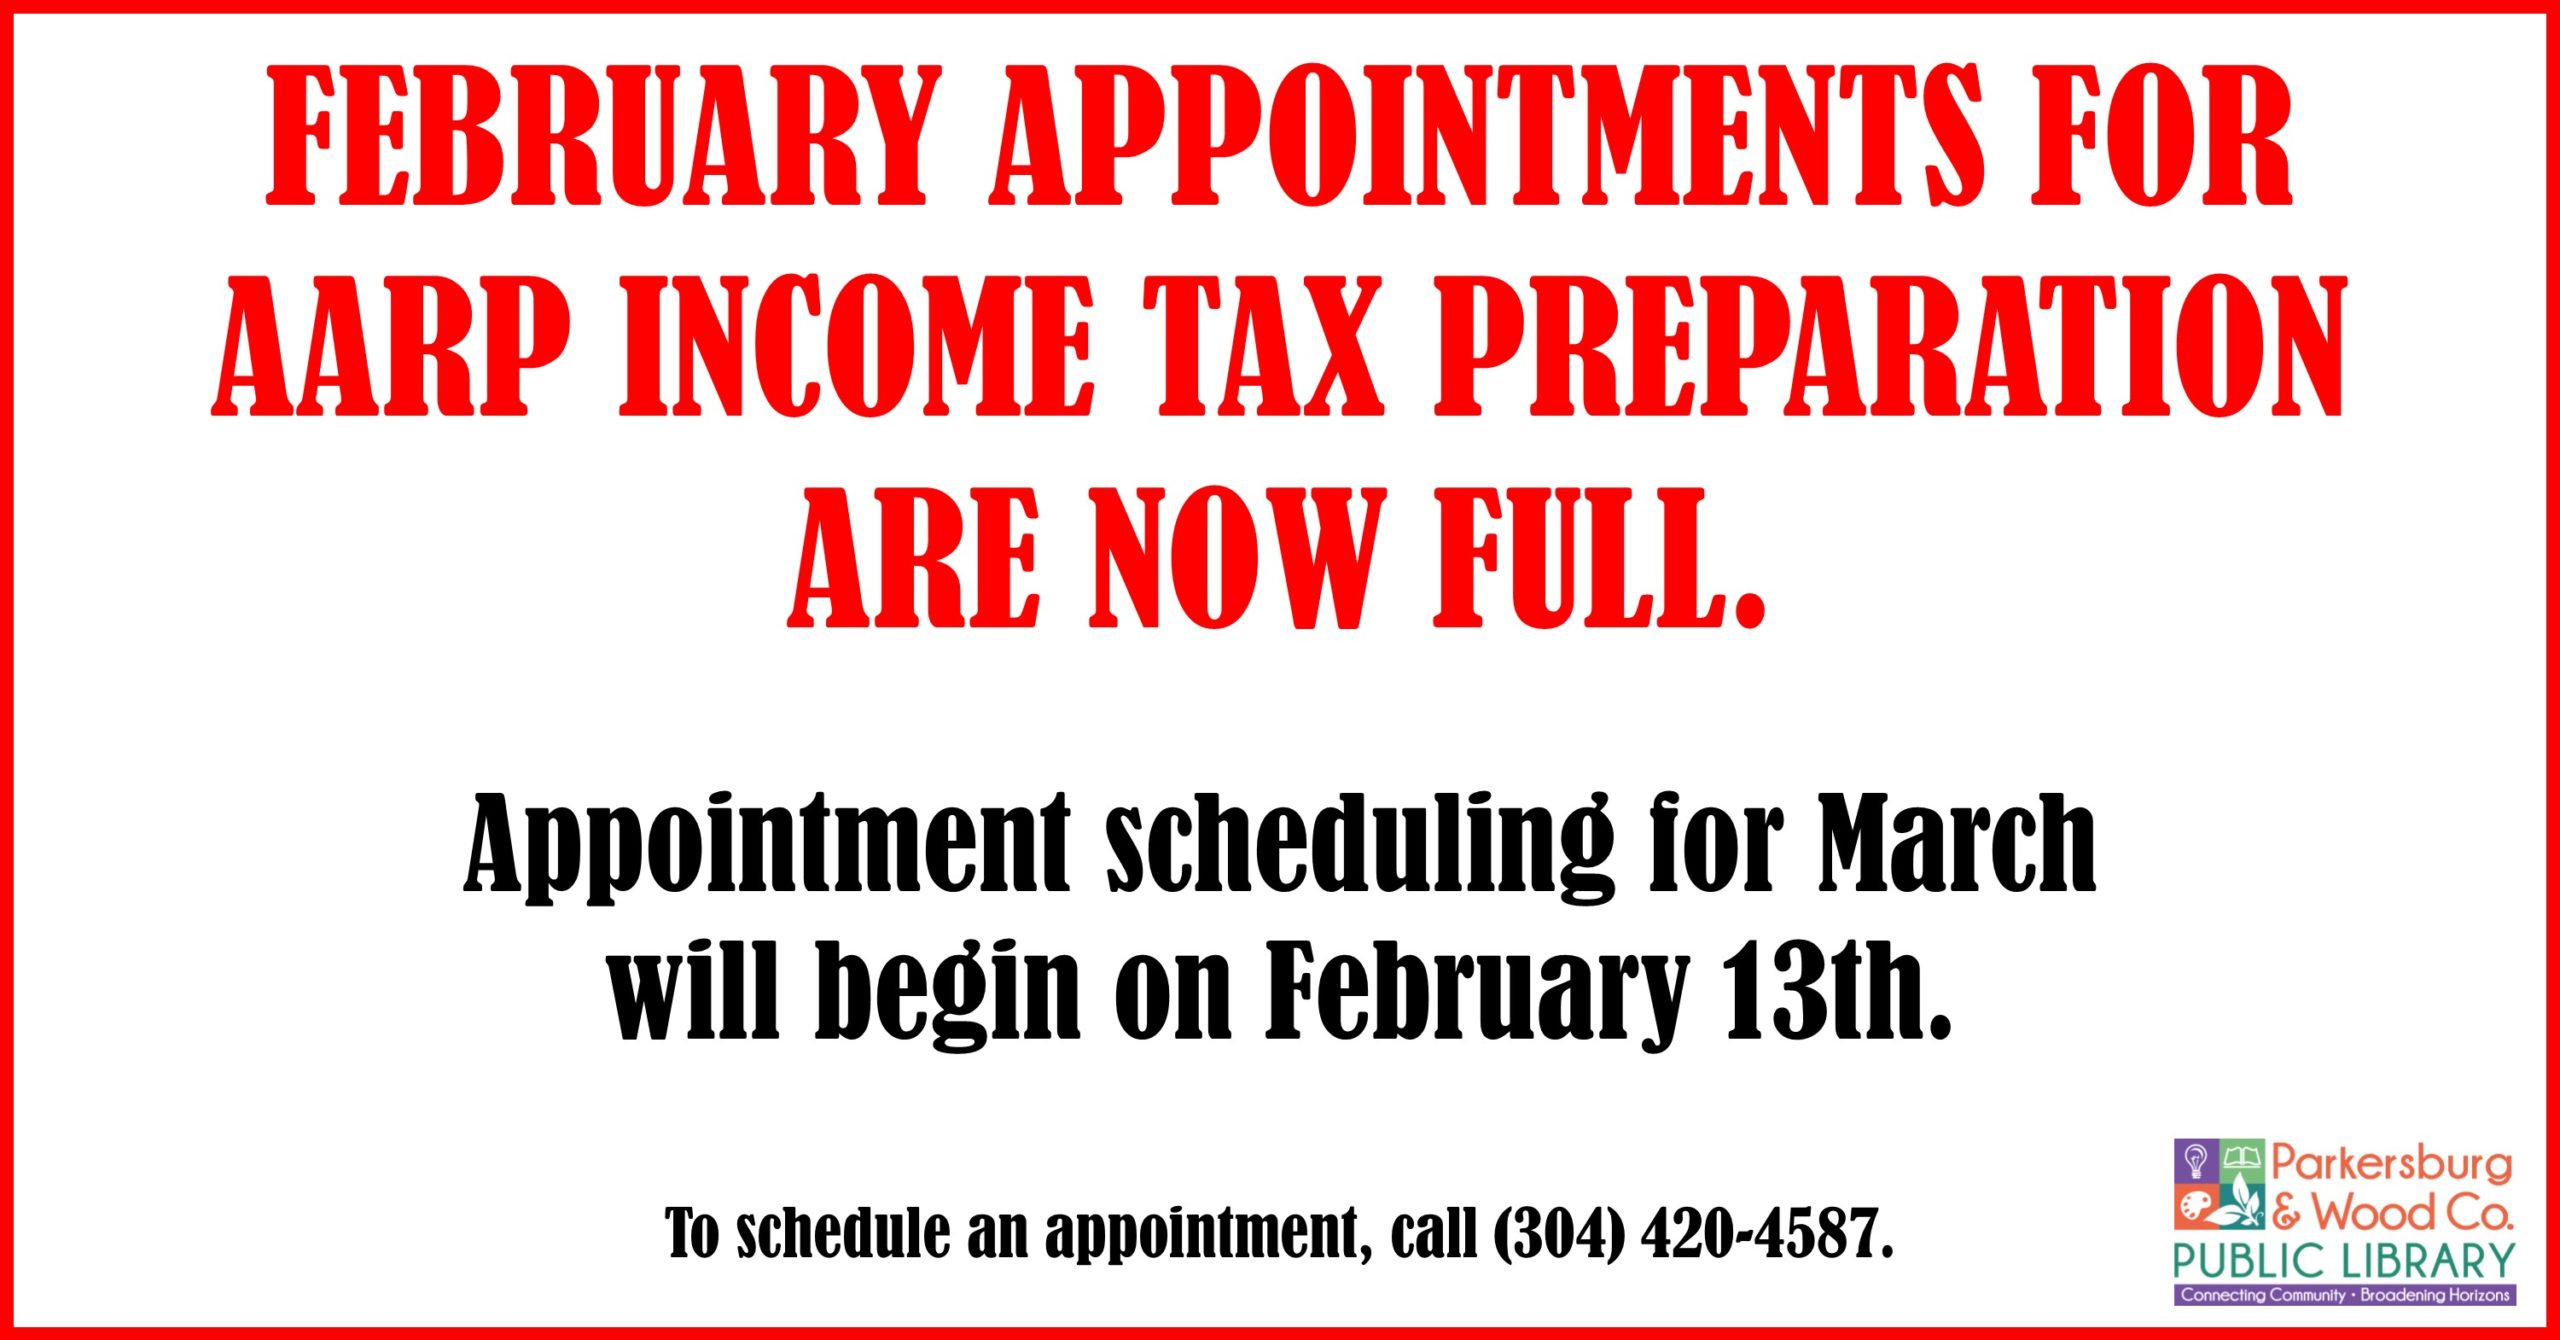 AARP Income Tax Preparation Appointments Full for February